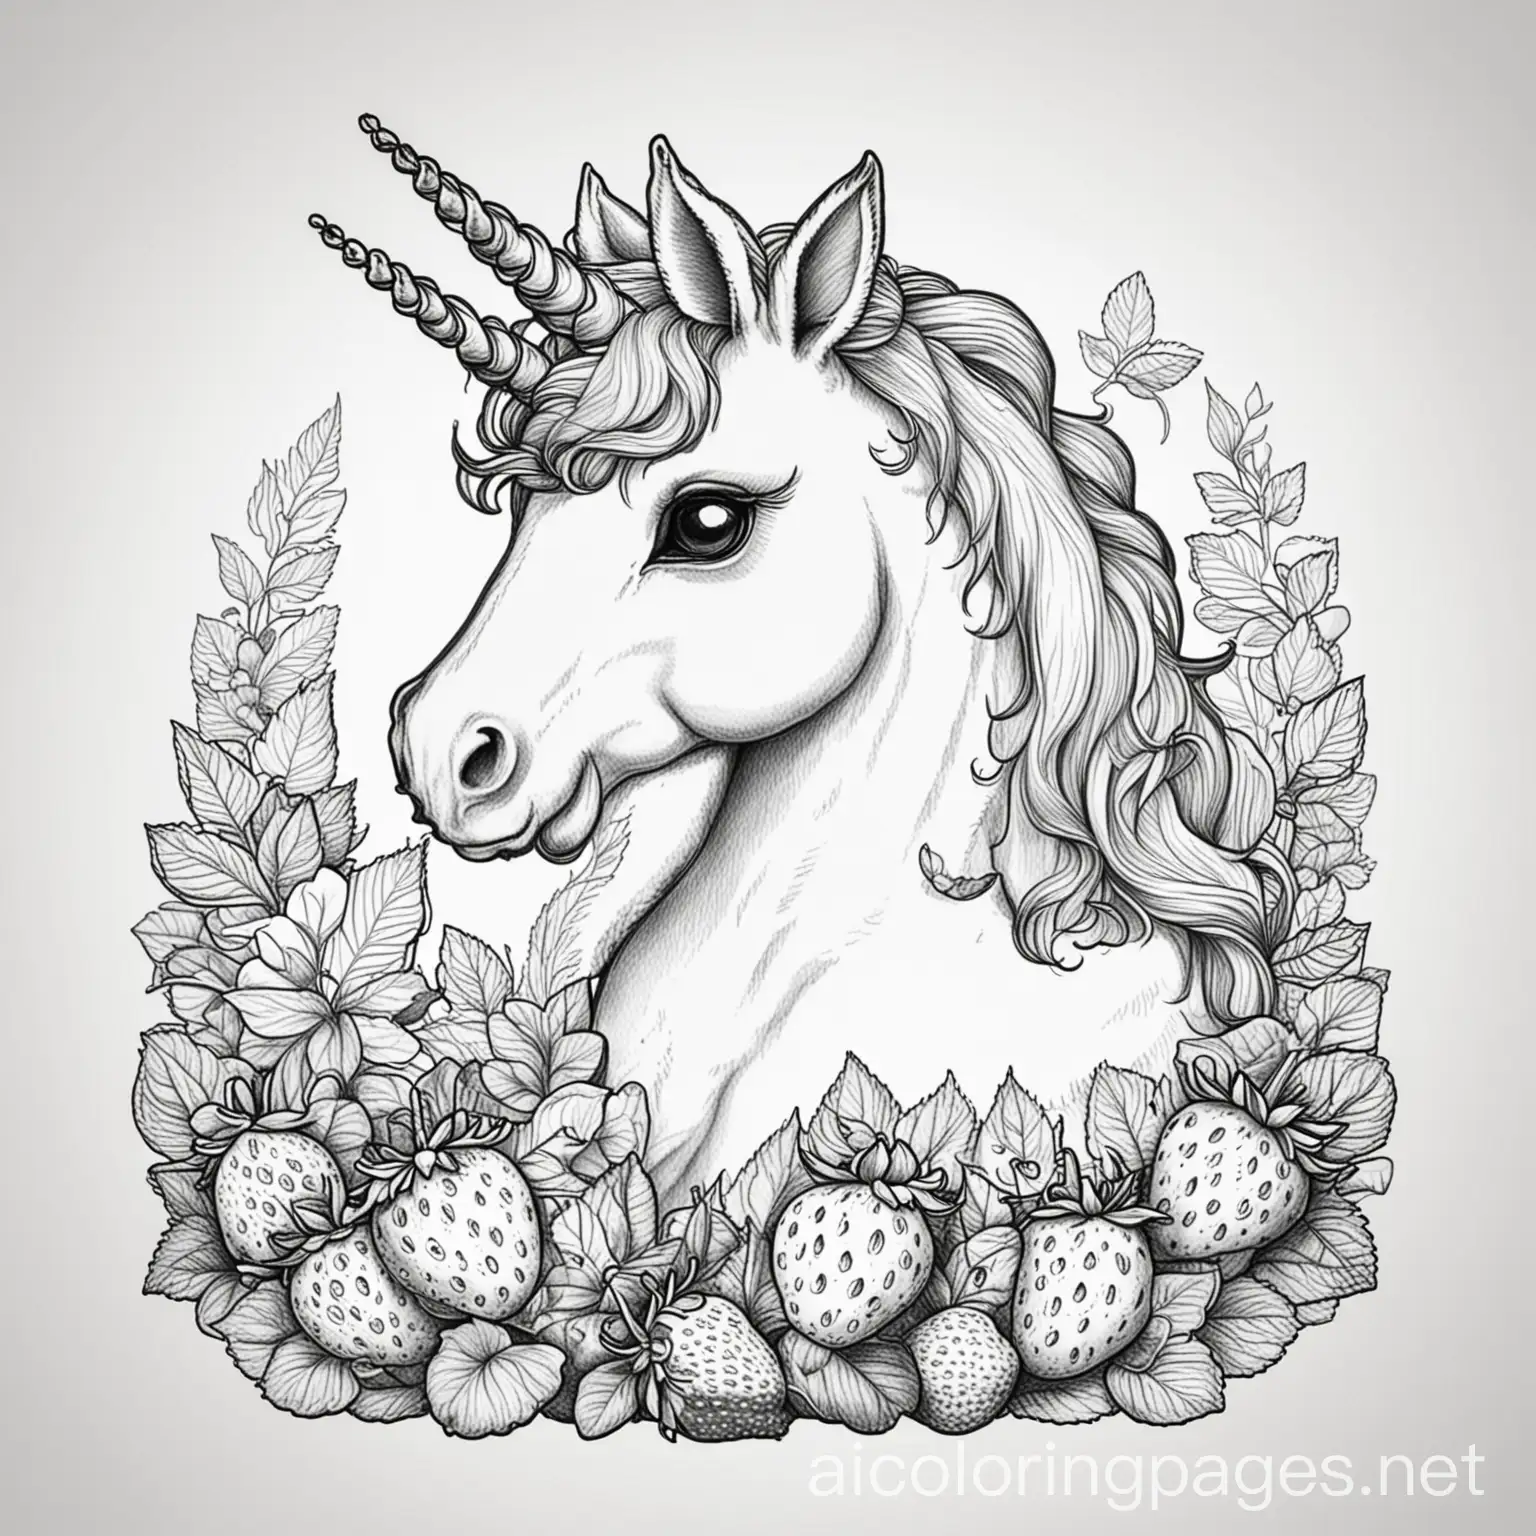 unicorn holding strawberries
, Coloring Page, black and white, line art, white background, Simplicity, Ample White Space. The background of the coloring page is plain white to make it easy for young children to color within the lines. The outlines of all the subjects are easy to distinguish, making it simple for kids to color without too much difficulty